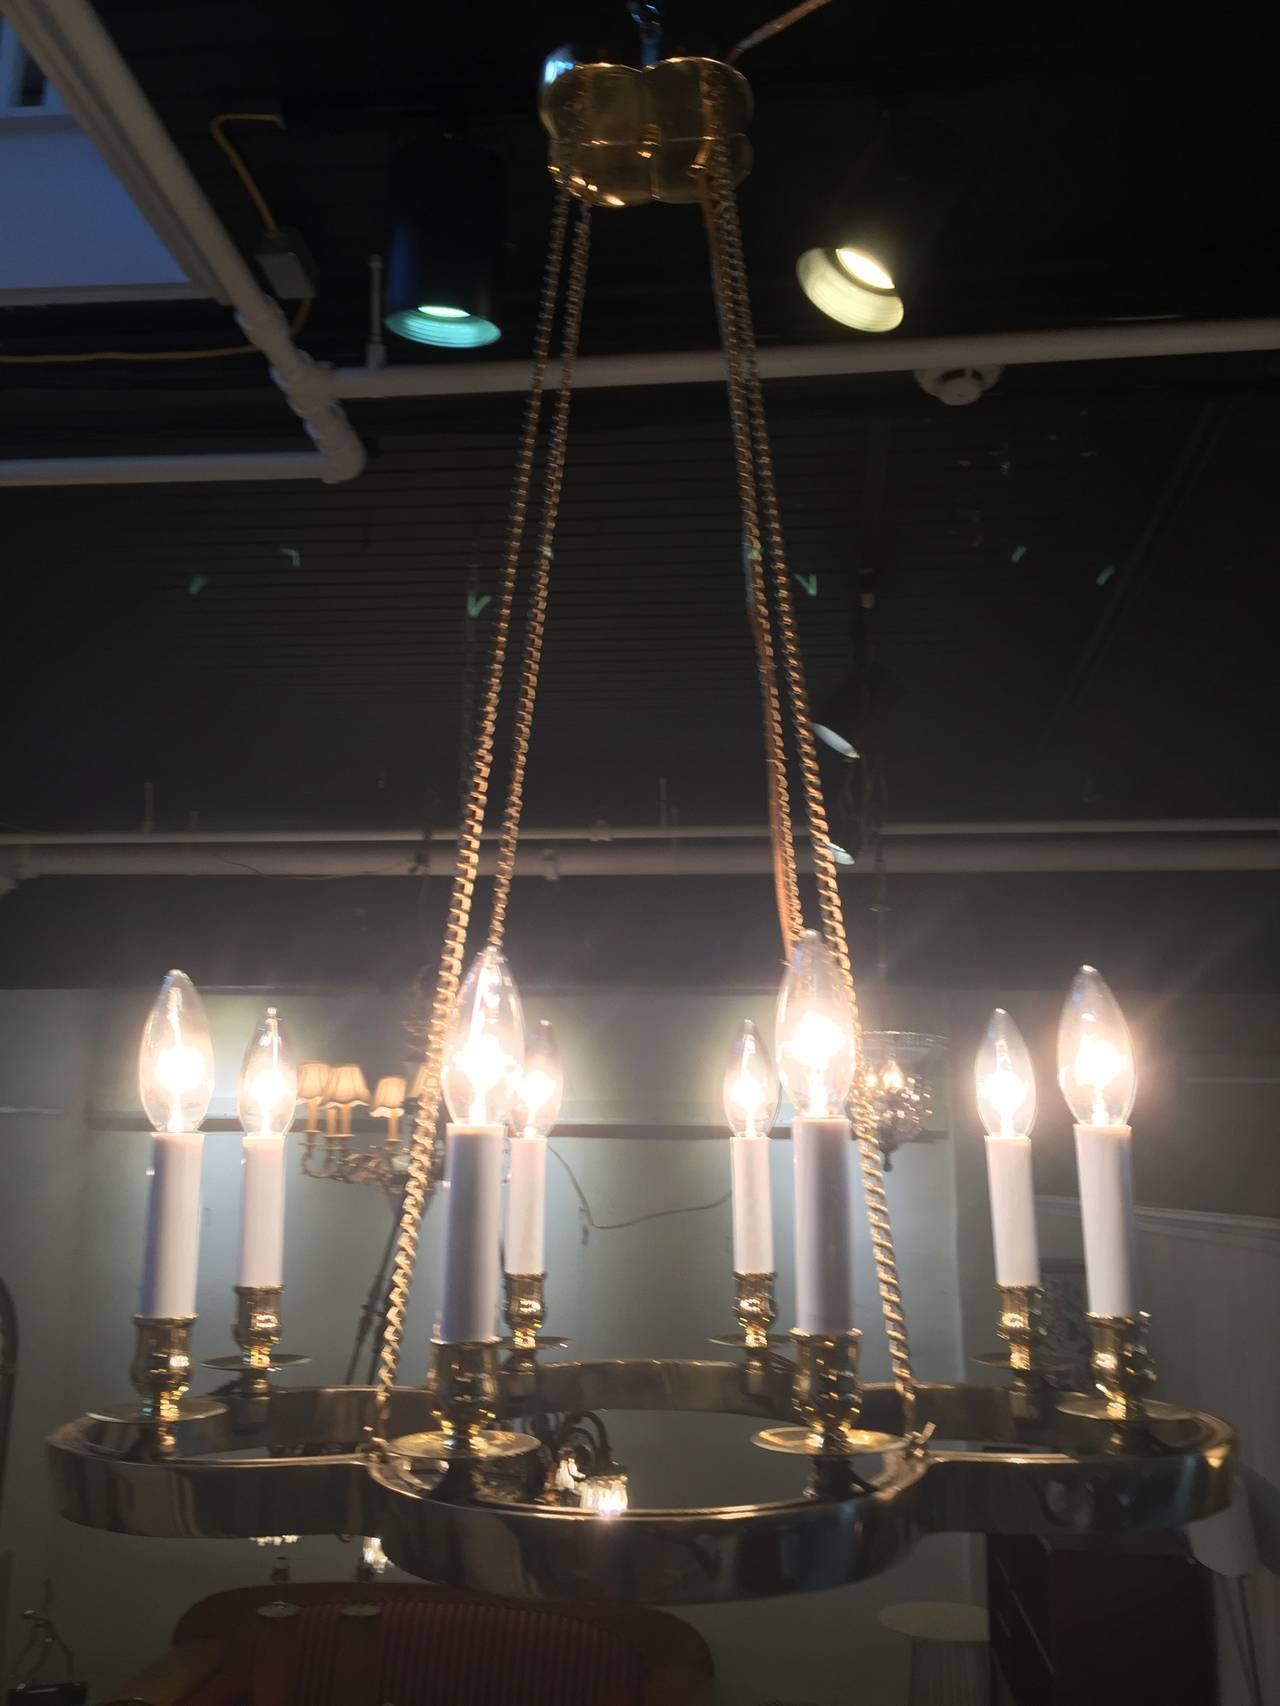 Brass chandelier in the manner of Tommi Parzinger, with signature brass medallion canopy with four brass chains supporting eight-light brass clover shaped platform, great diminutive size. Recently professionally polished and rewired.